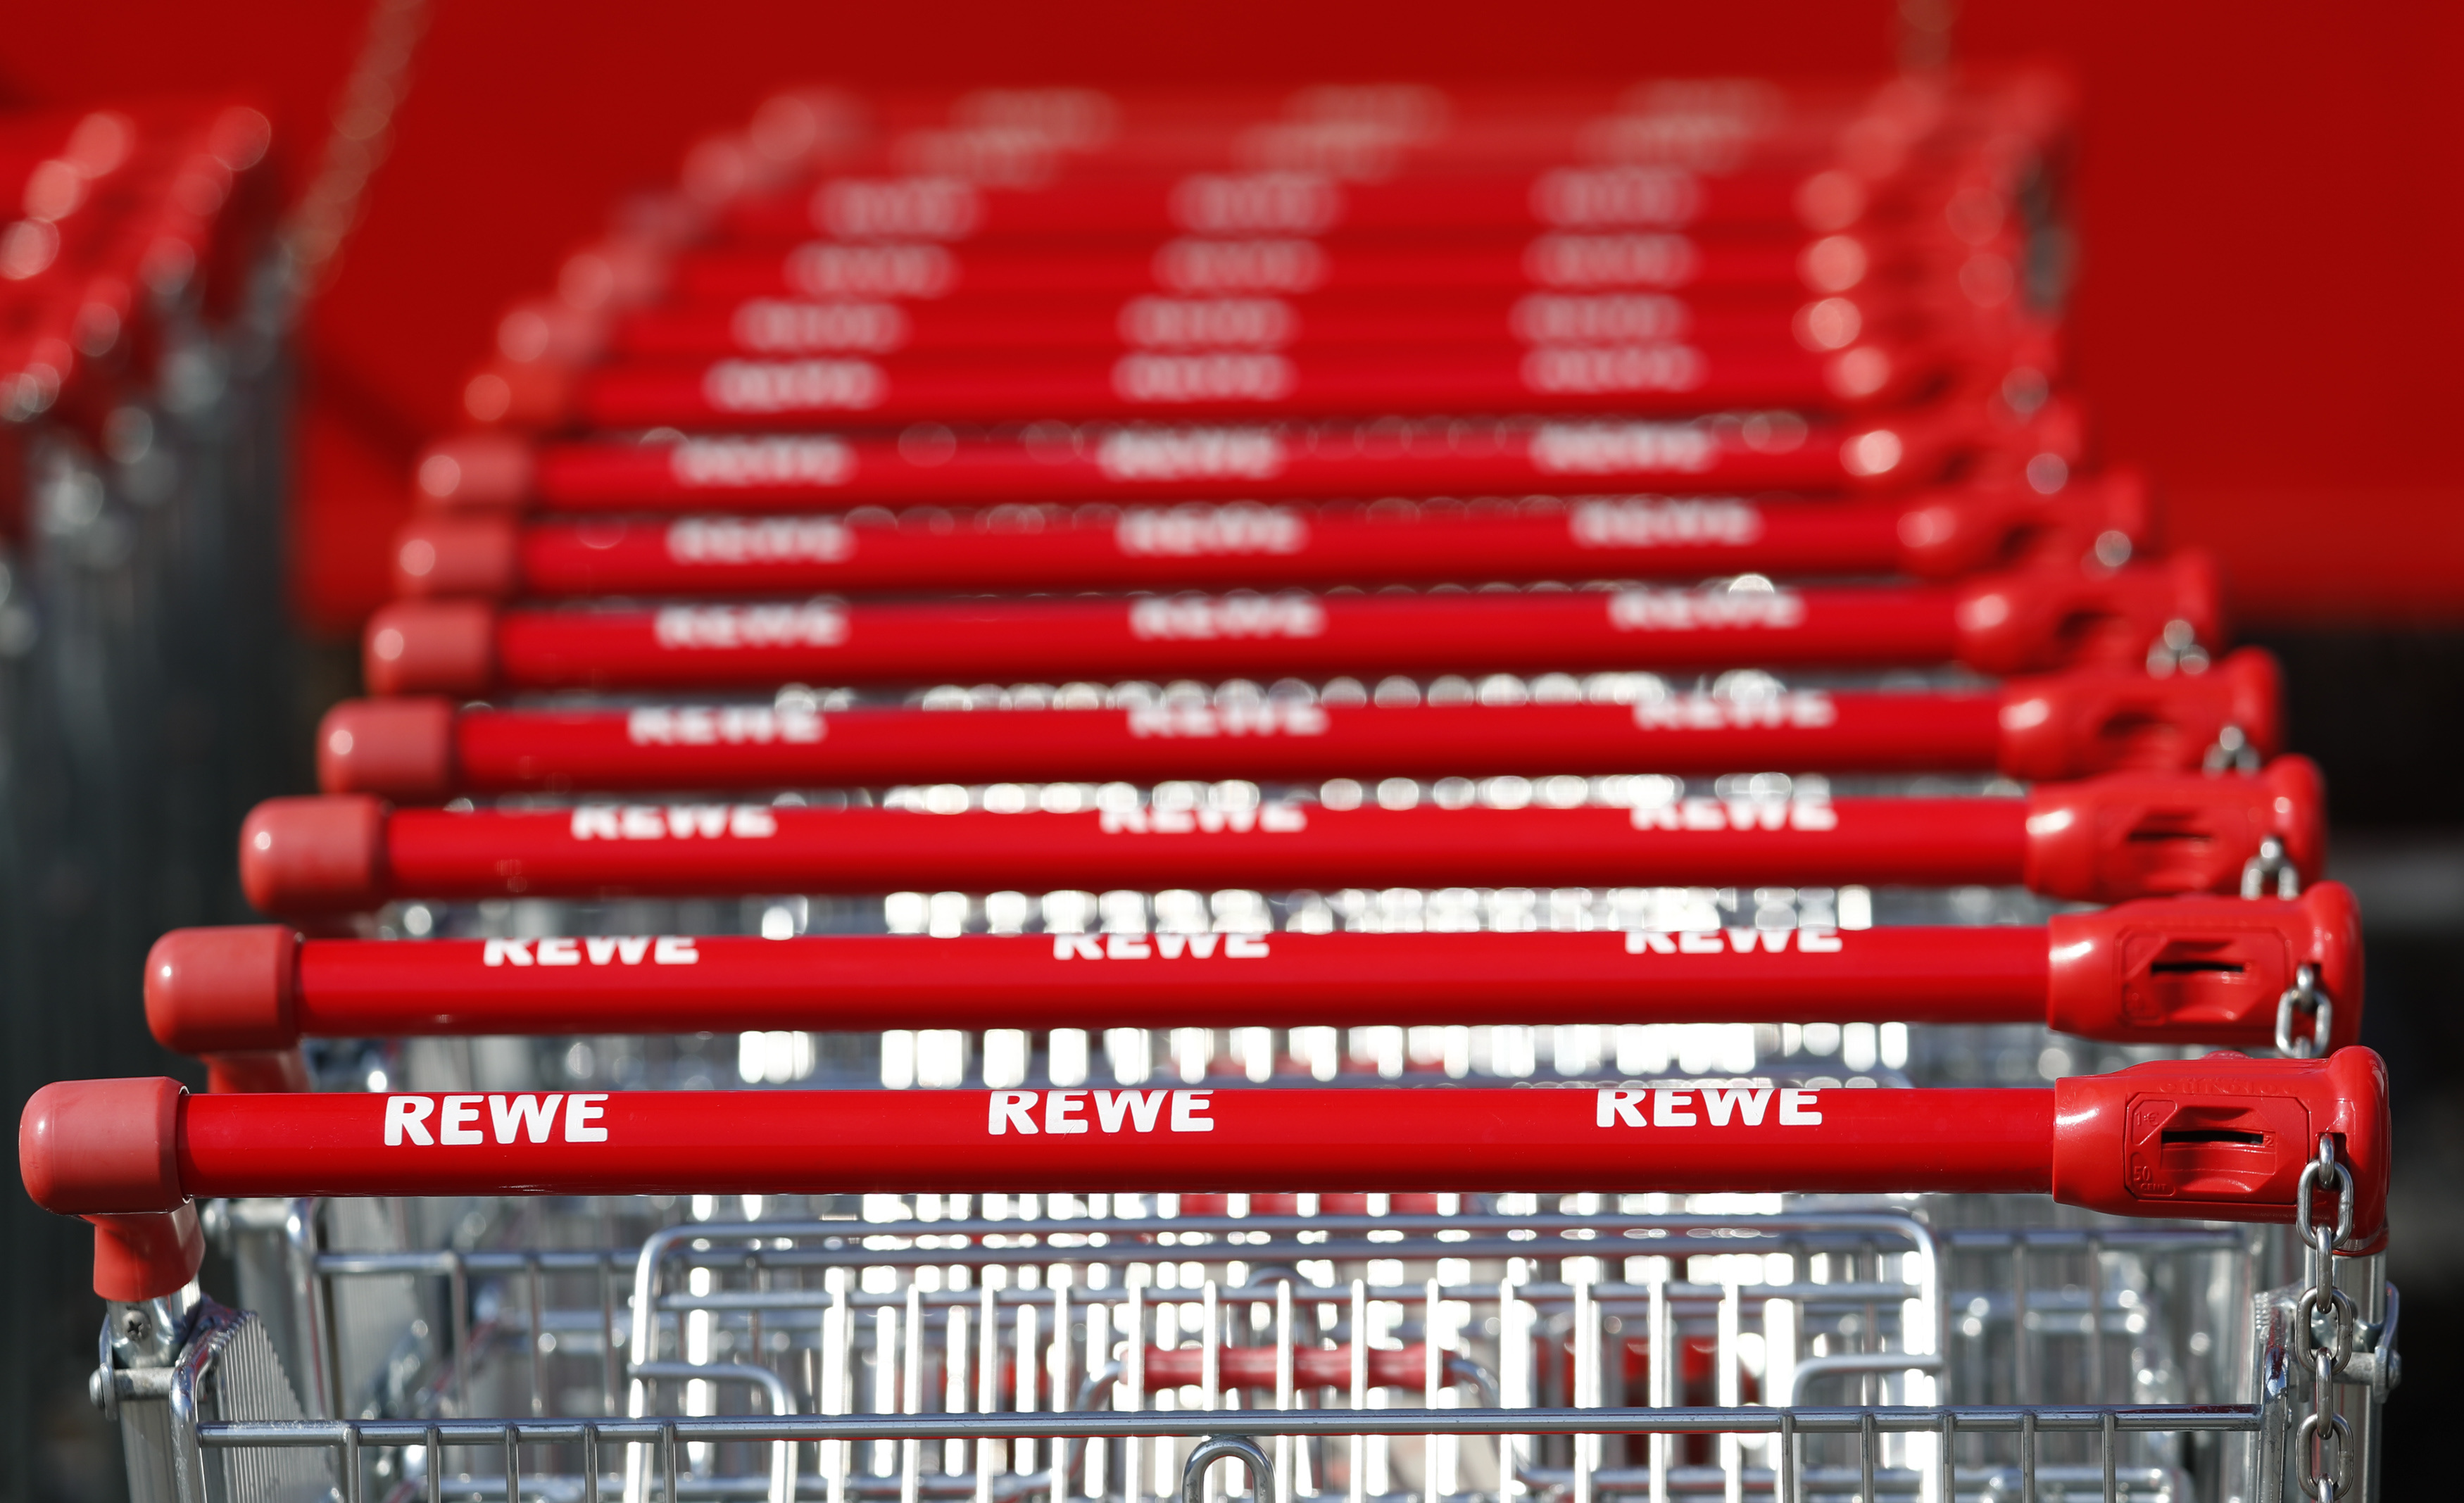 Shopping carts with logos of German supermarket chain Rewe are pictured at a shopping centre in Hanau